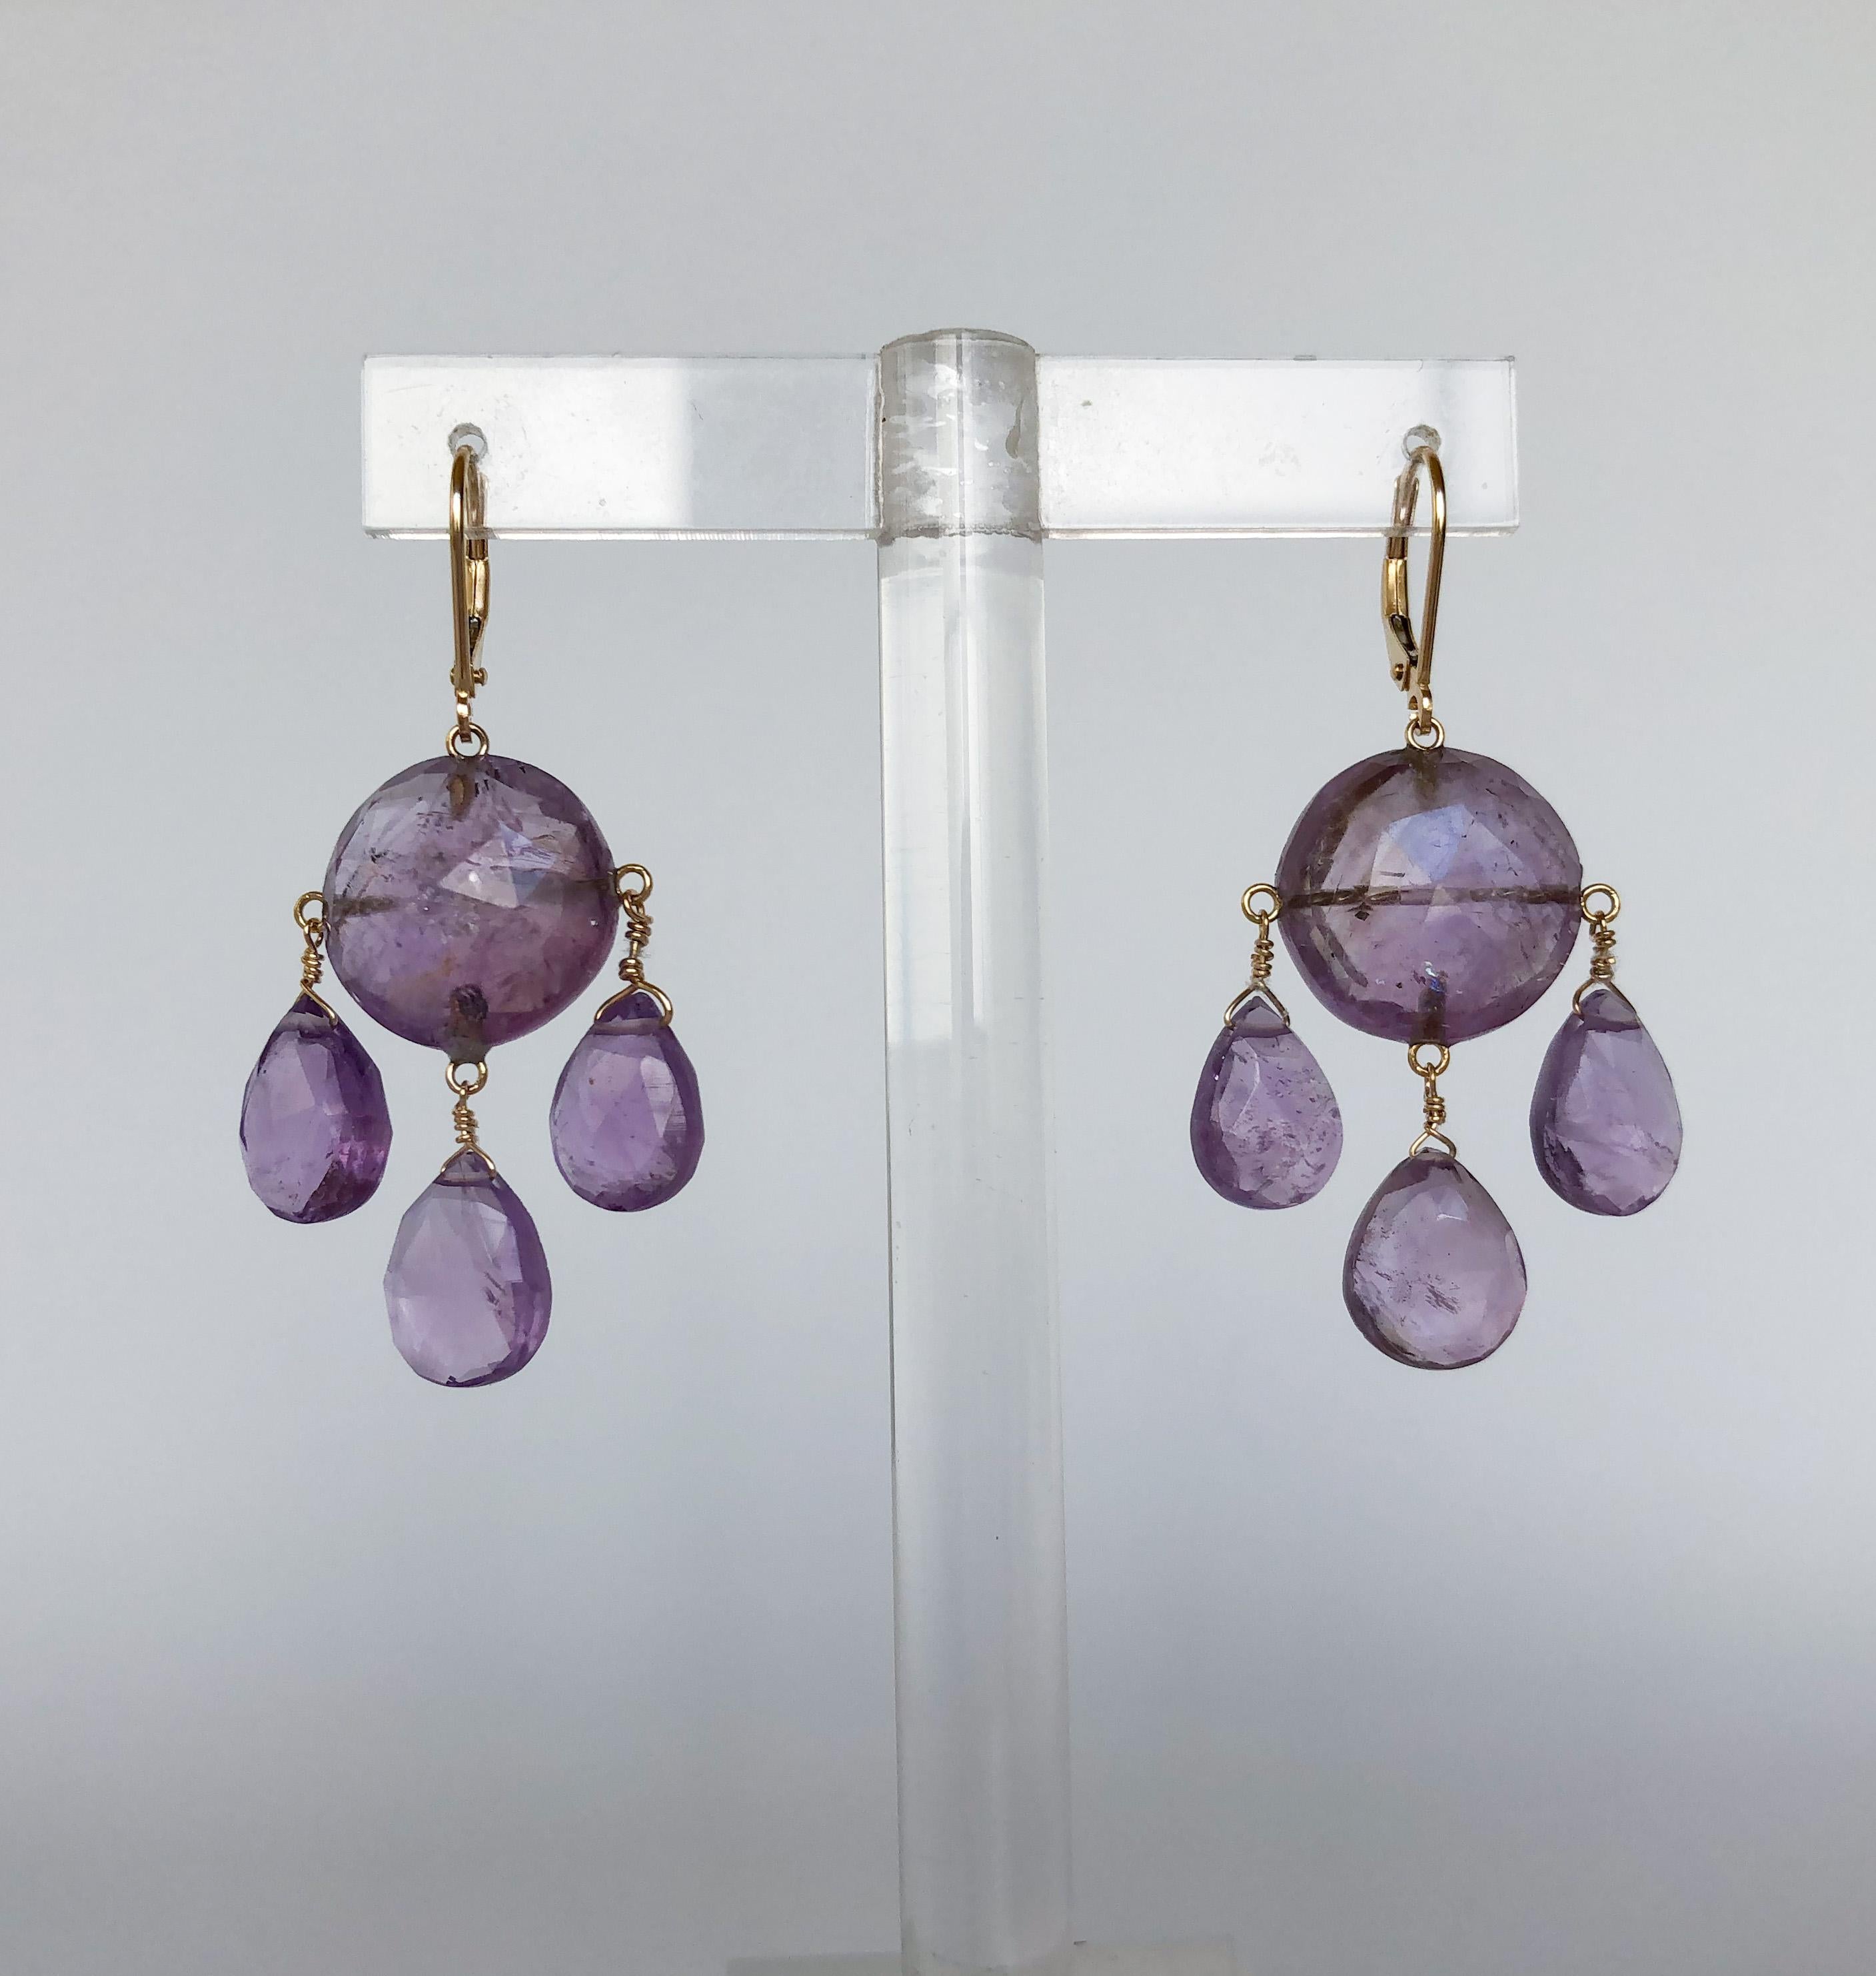 These elegant earrings are made with a 15 mm amethyst stone and three 10 mm amethyst teardrop beads. The earrings are sturdily secured with 14k yellow gold wiring and lever-backs. The earrings are about 1.75 inches long, which hang beautifully for